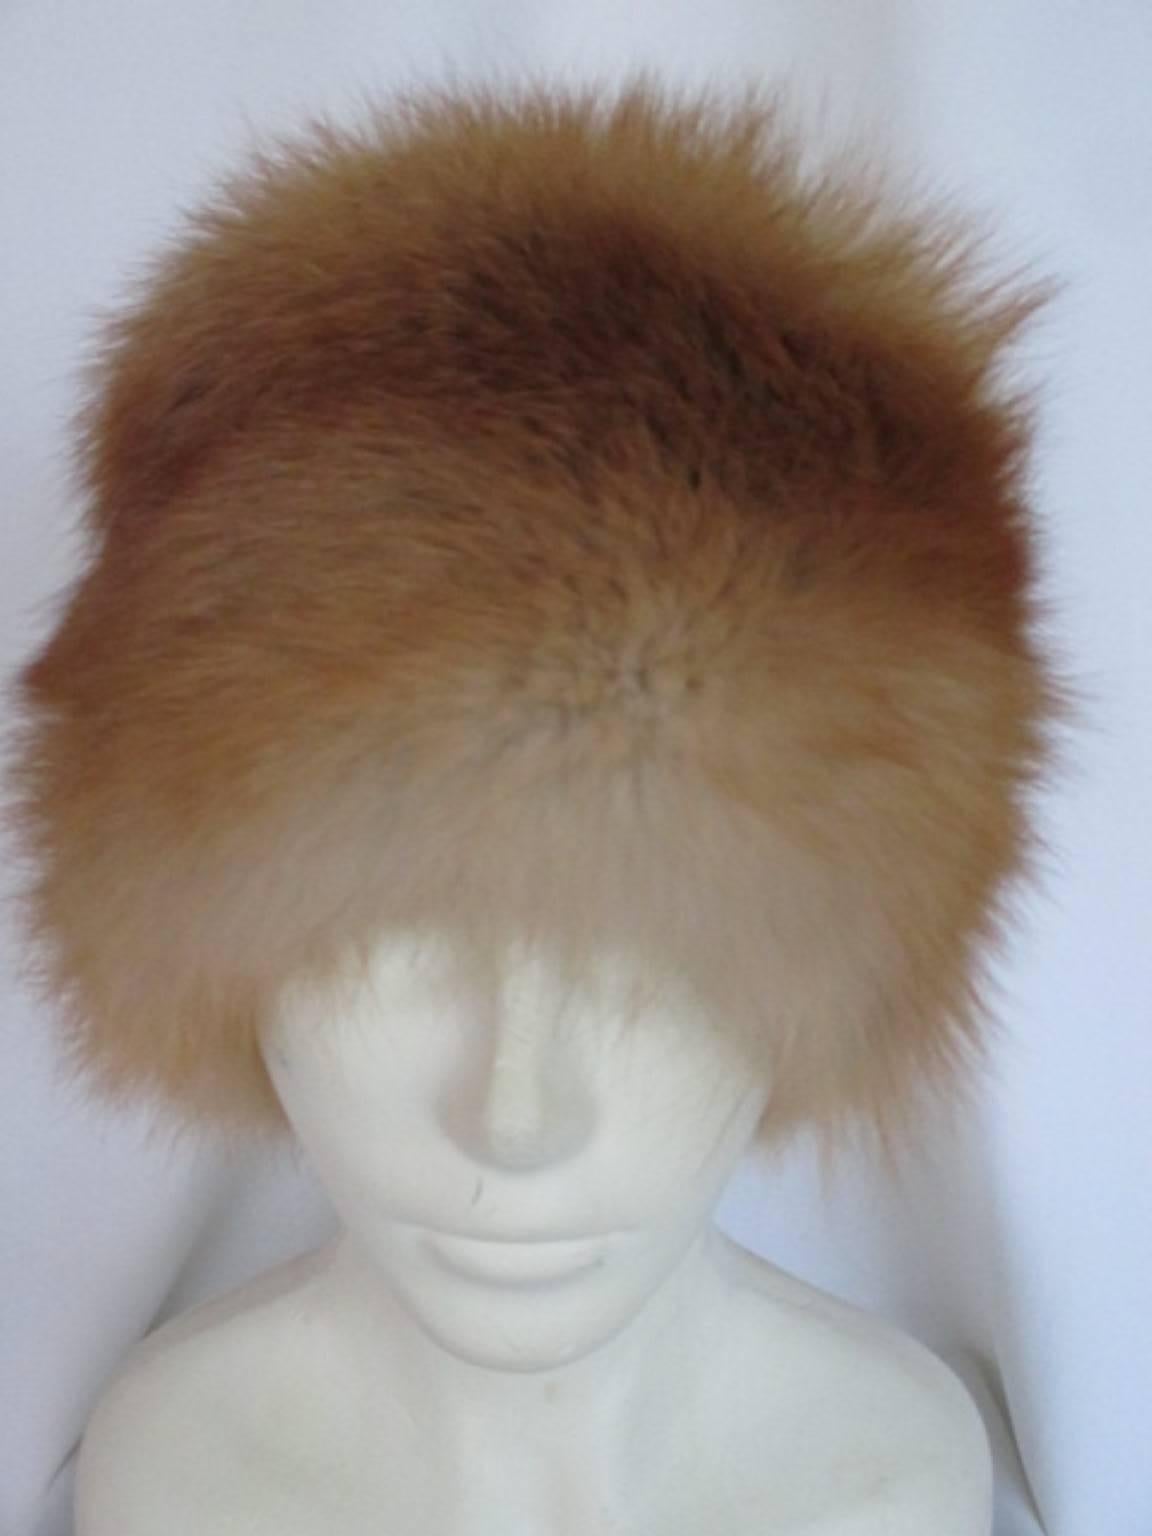 This hat is made of very soft red fox fur is light weight and fits over the ears.
In good vintage condition
circunference is about 58cm/22.8 inch.
Please note that vintage items are not new and therefore might have minor imperfections. 